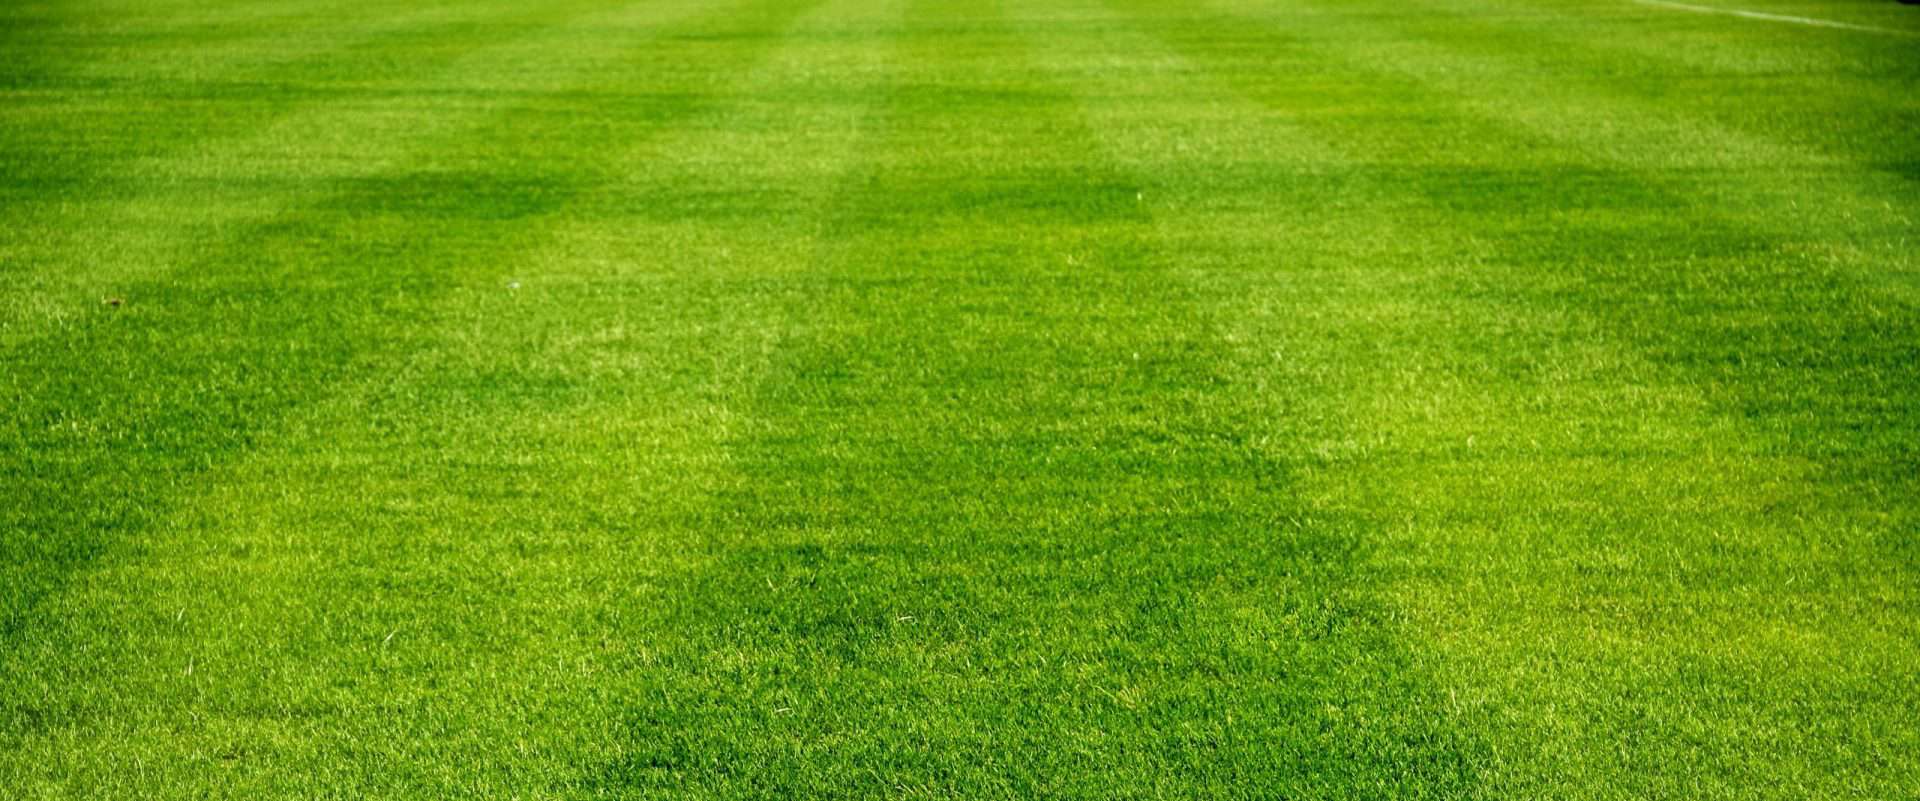 Core Aerating and Seeding Your Lawn